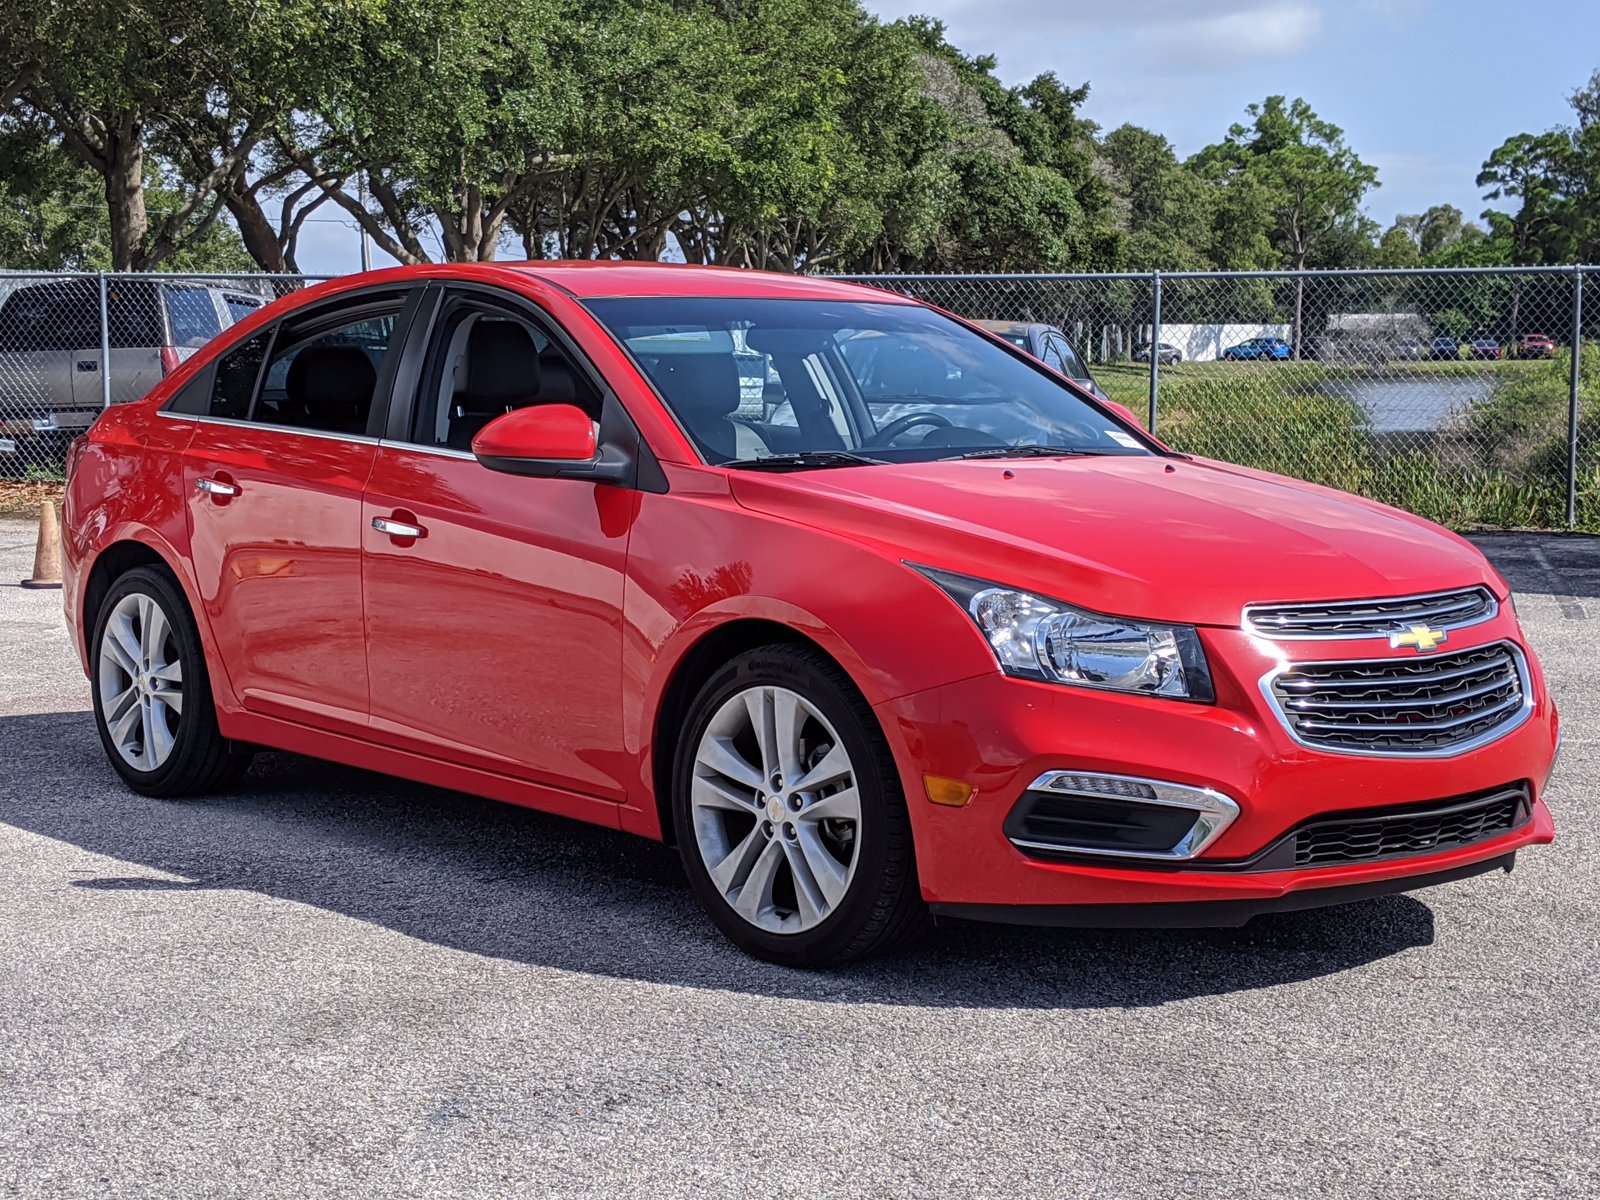 Pre-Owned 2016 Chevrolet Cruze Limited LTZ